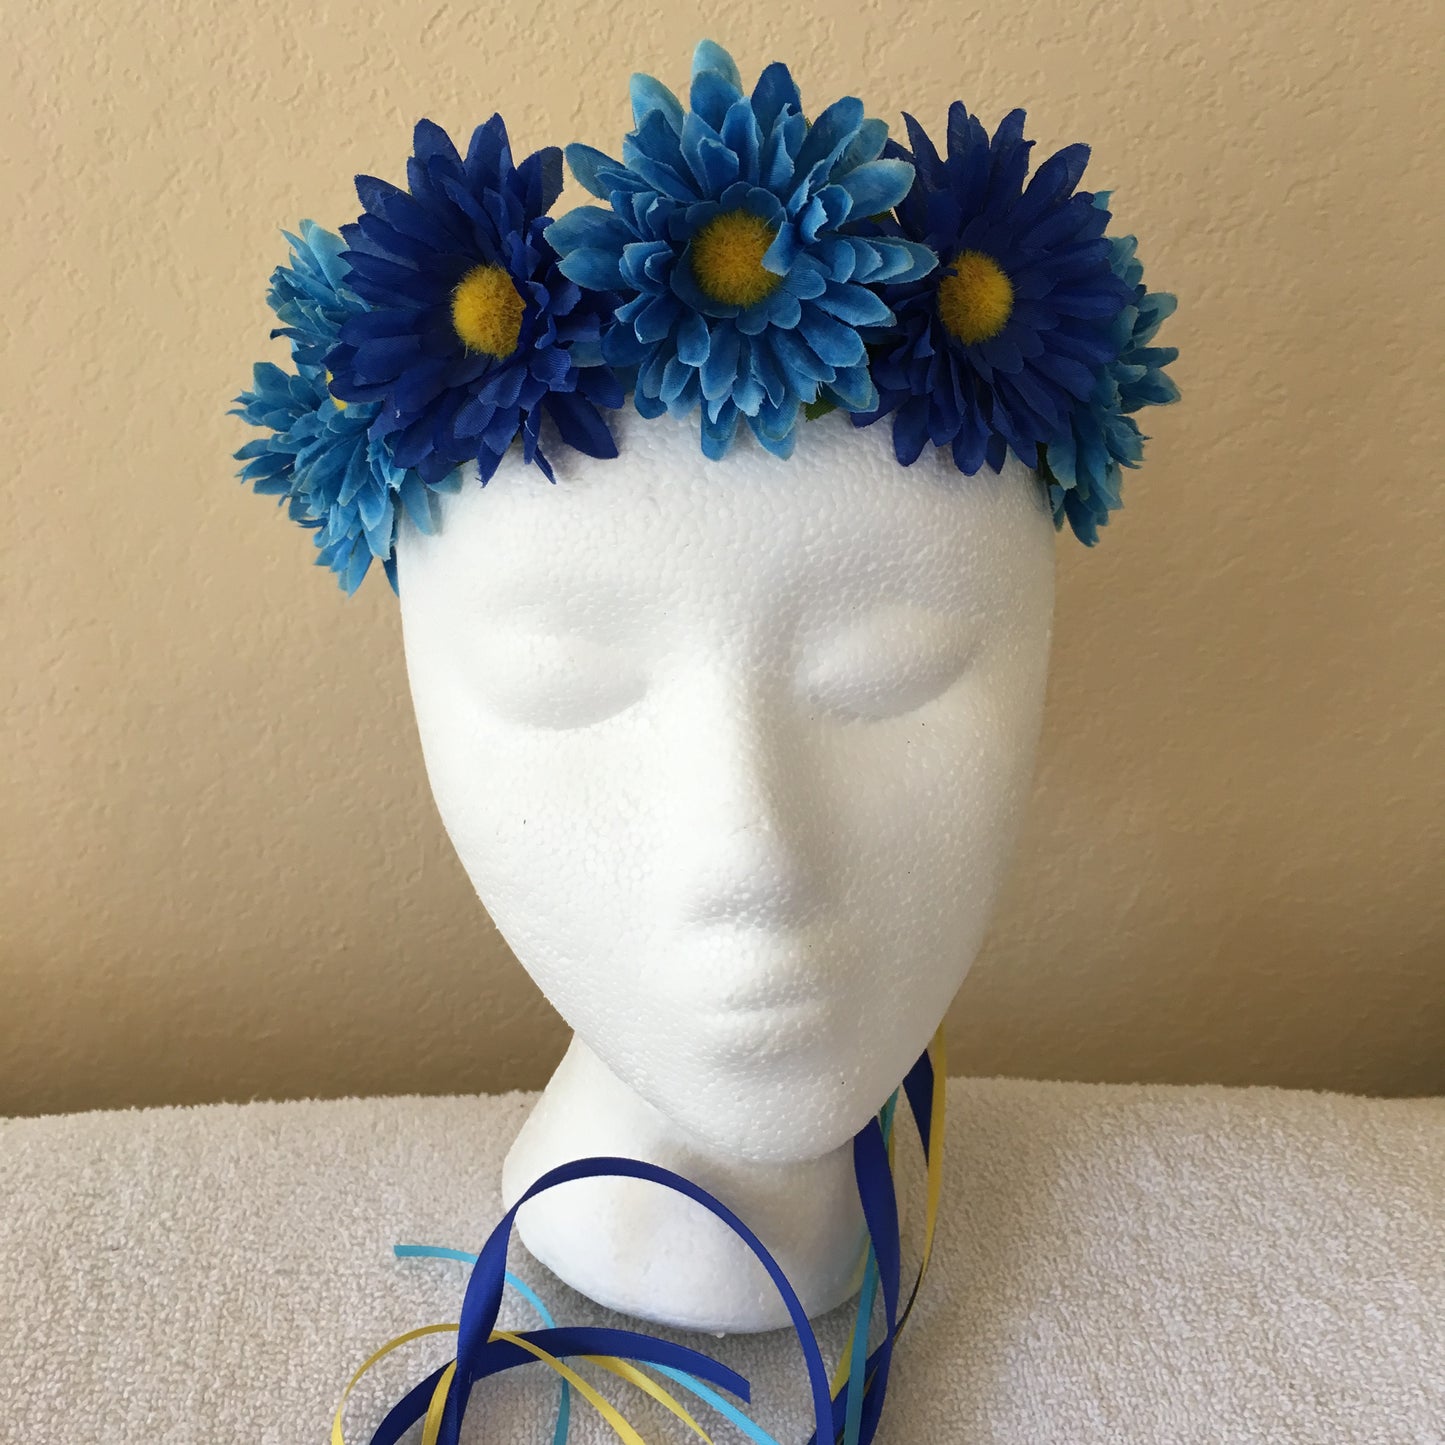 Small Wreath - Light & dark blue patterned daisies